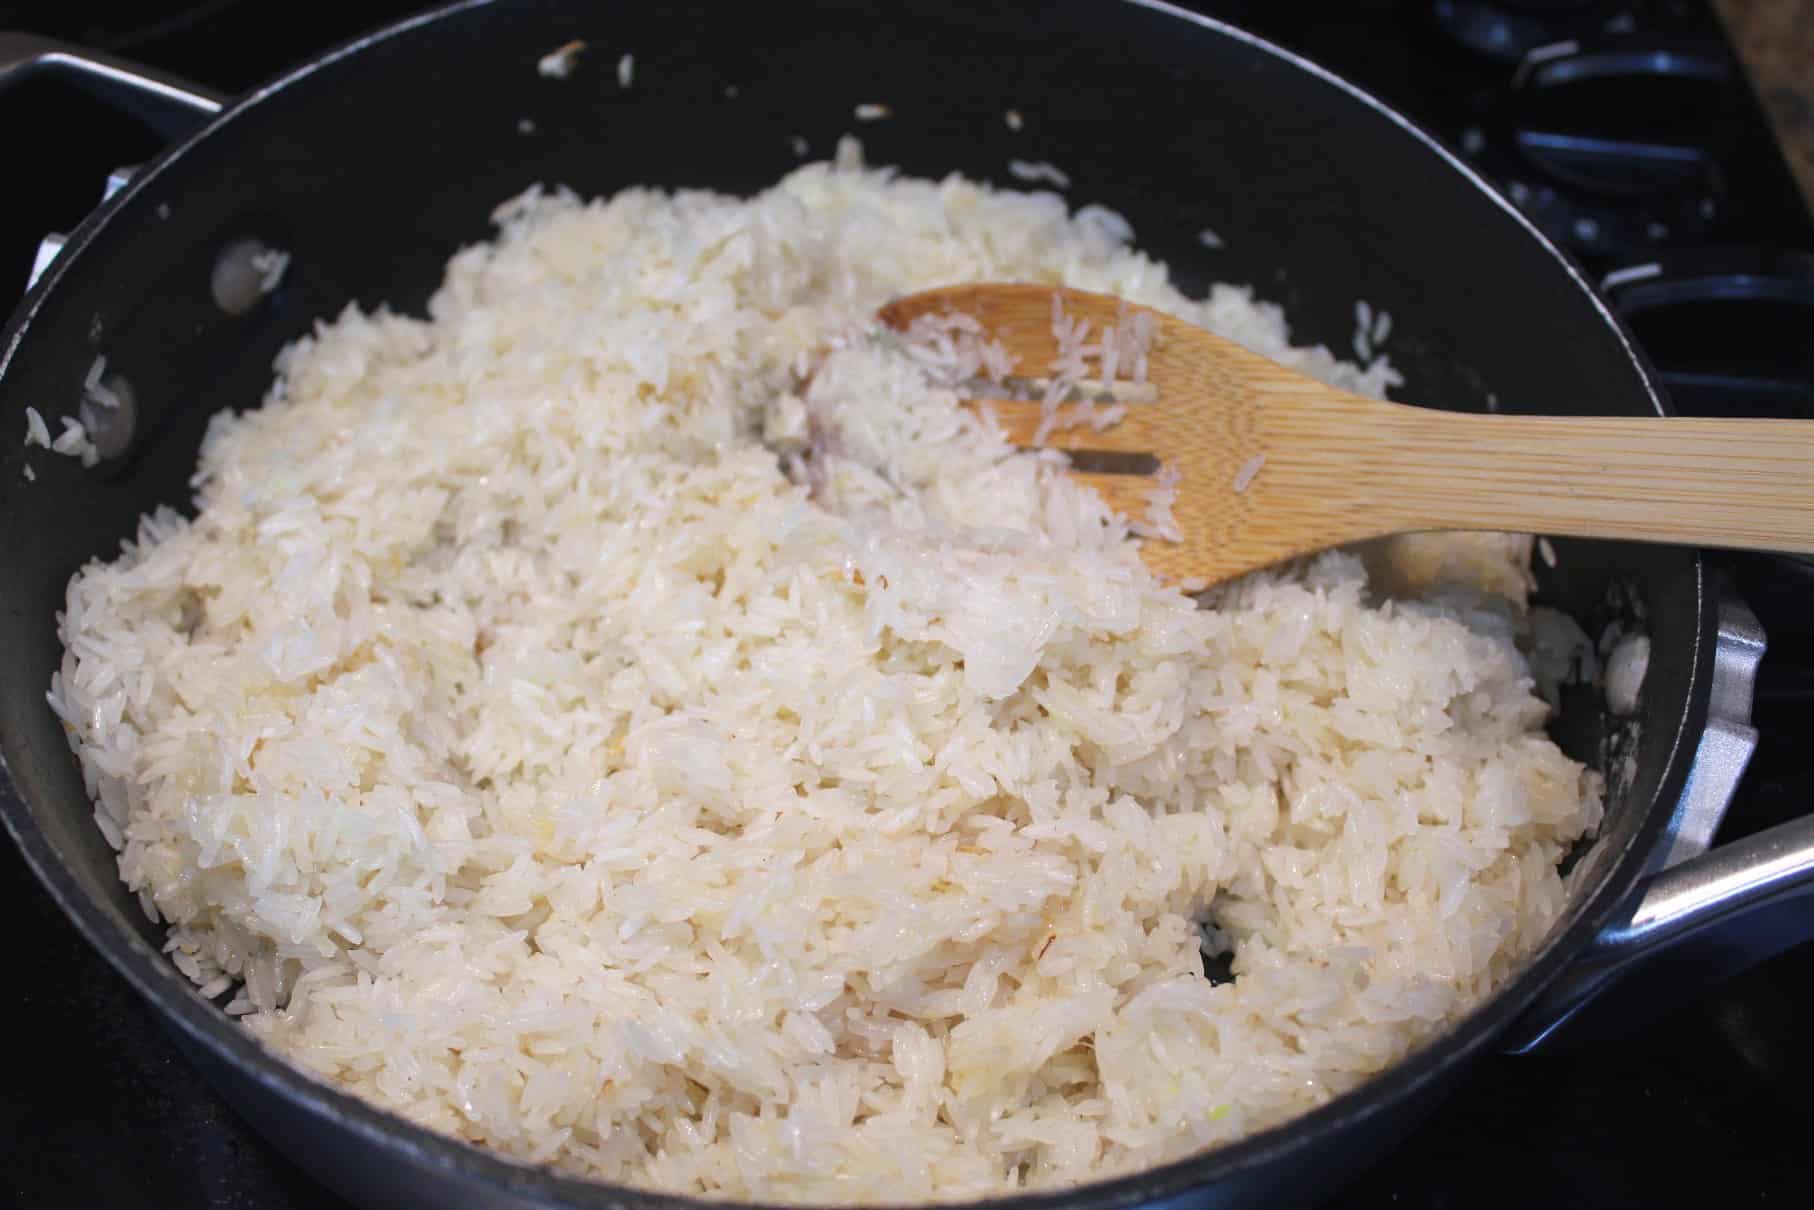 Saute rice in the same skillet where you were sauteing onions and garlic.